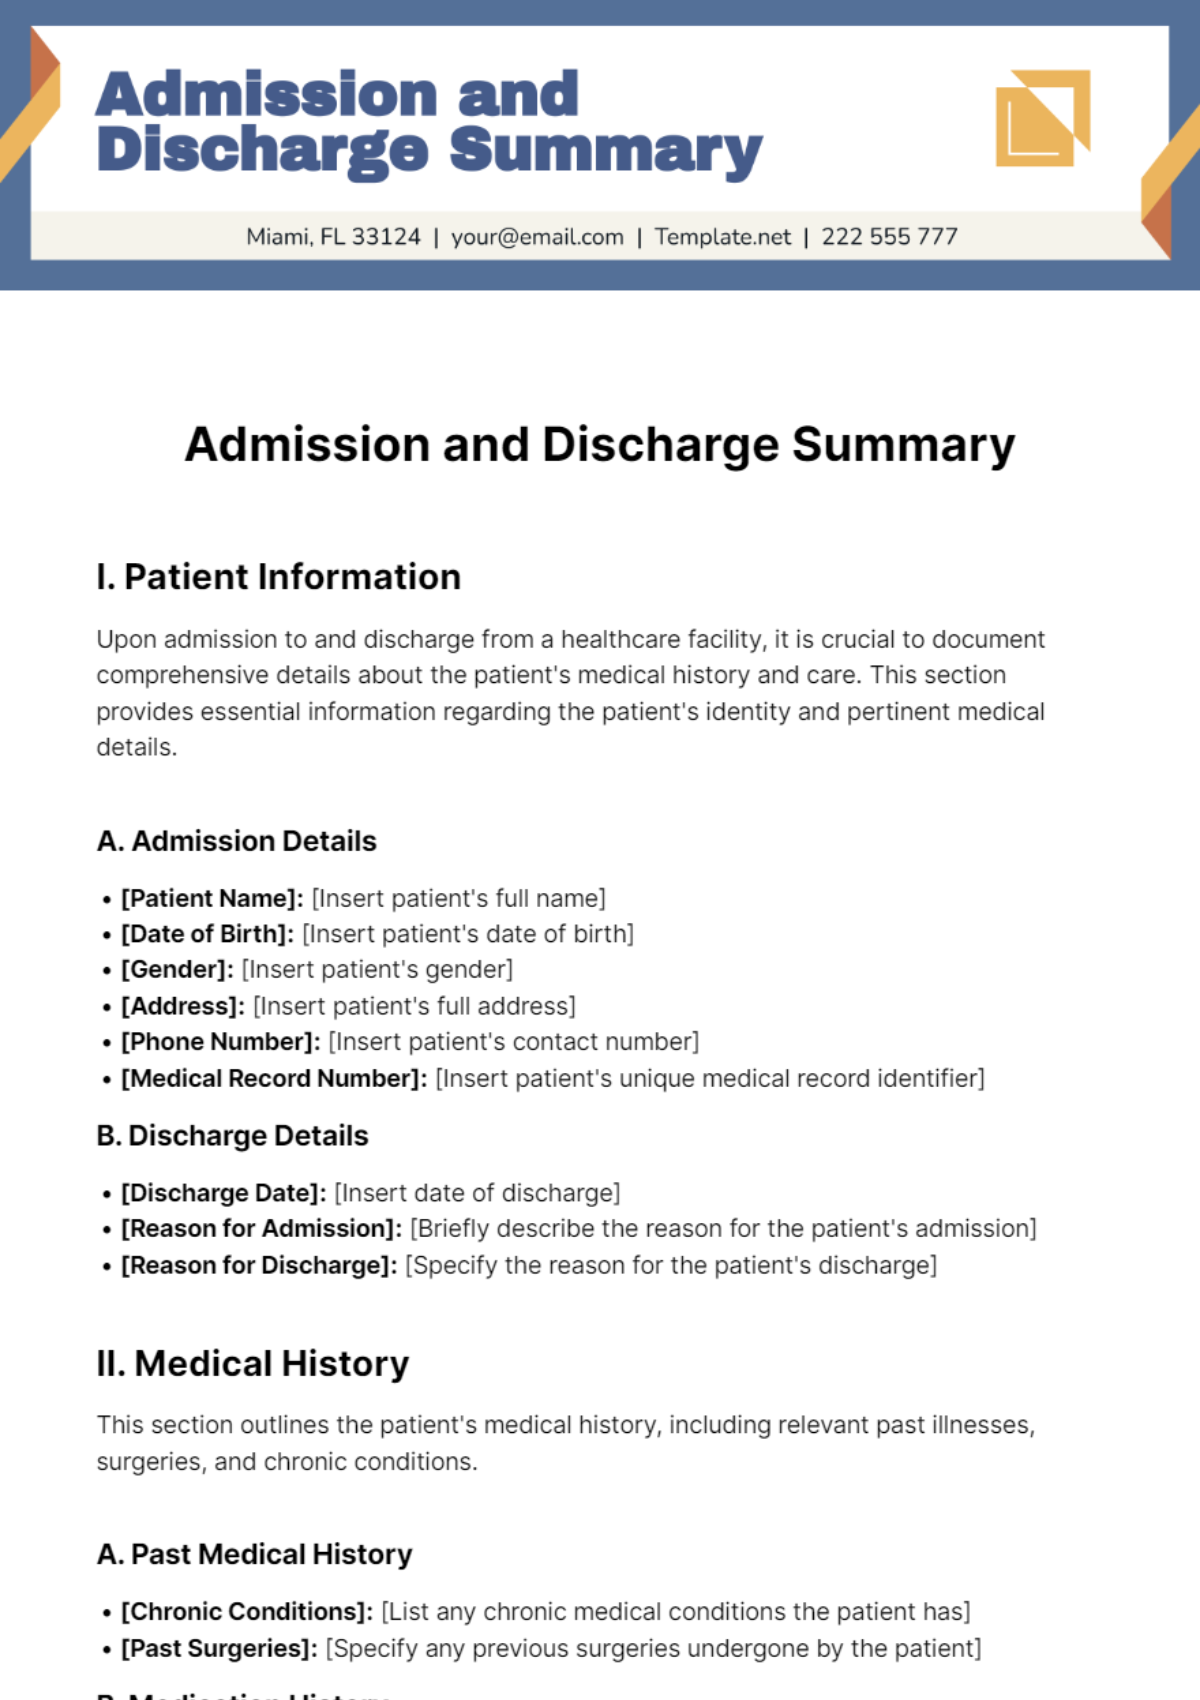 Admission and Discharge Summary Template